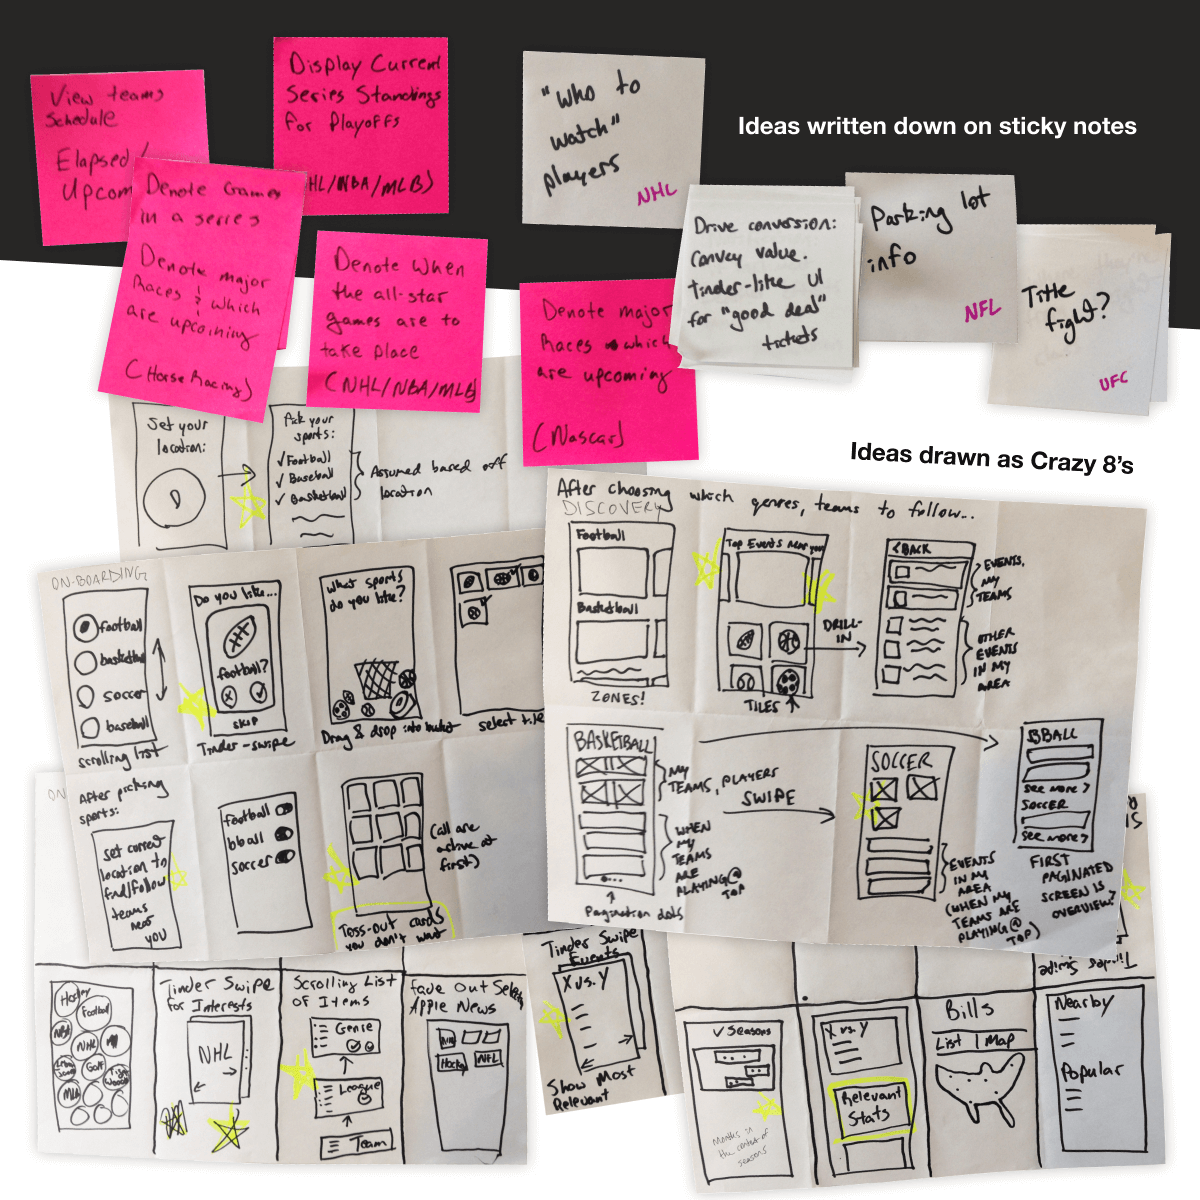 Collage of crazy 8 sketches and sticky notes from group brainstorm